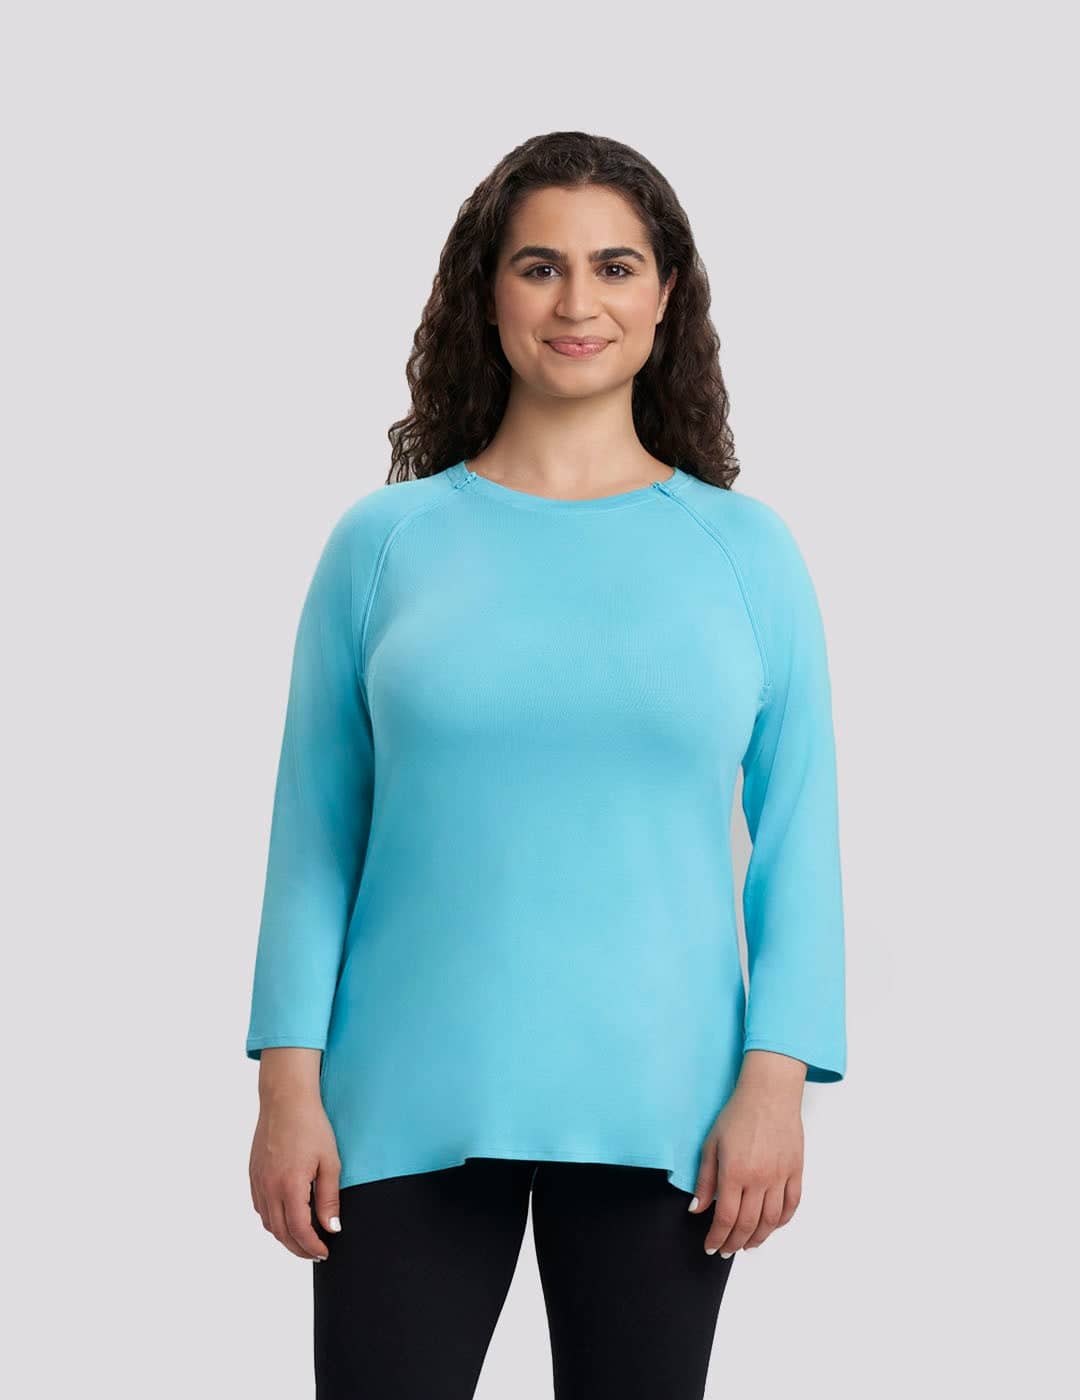 Womens Chest Port Access Teal